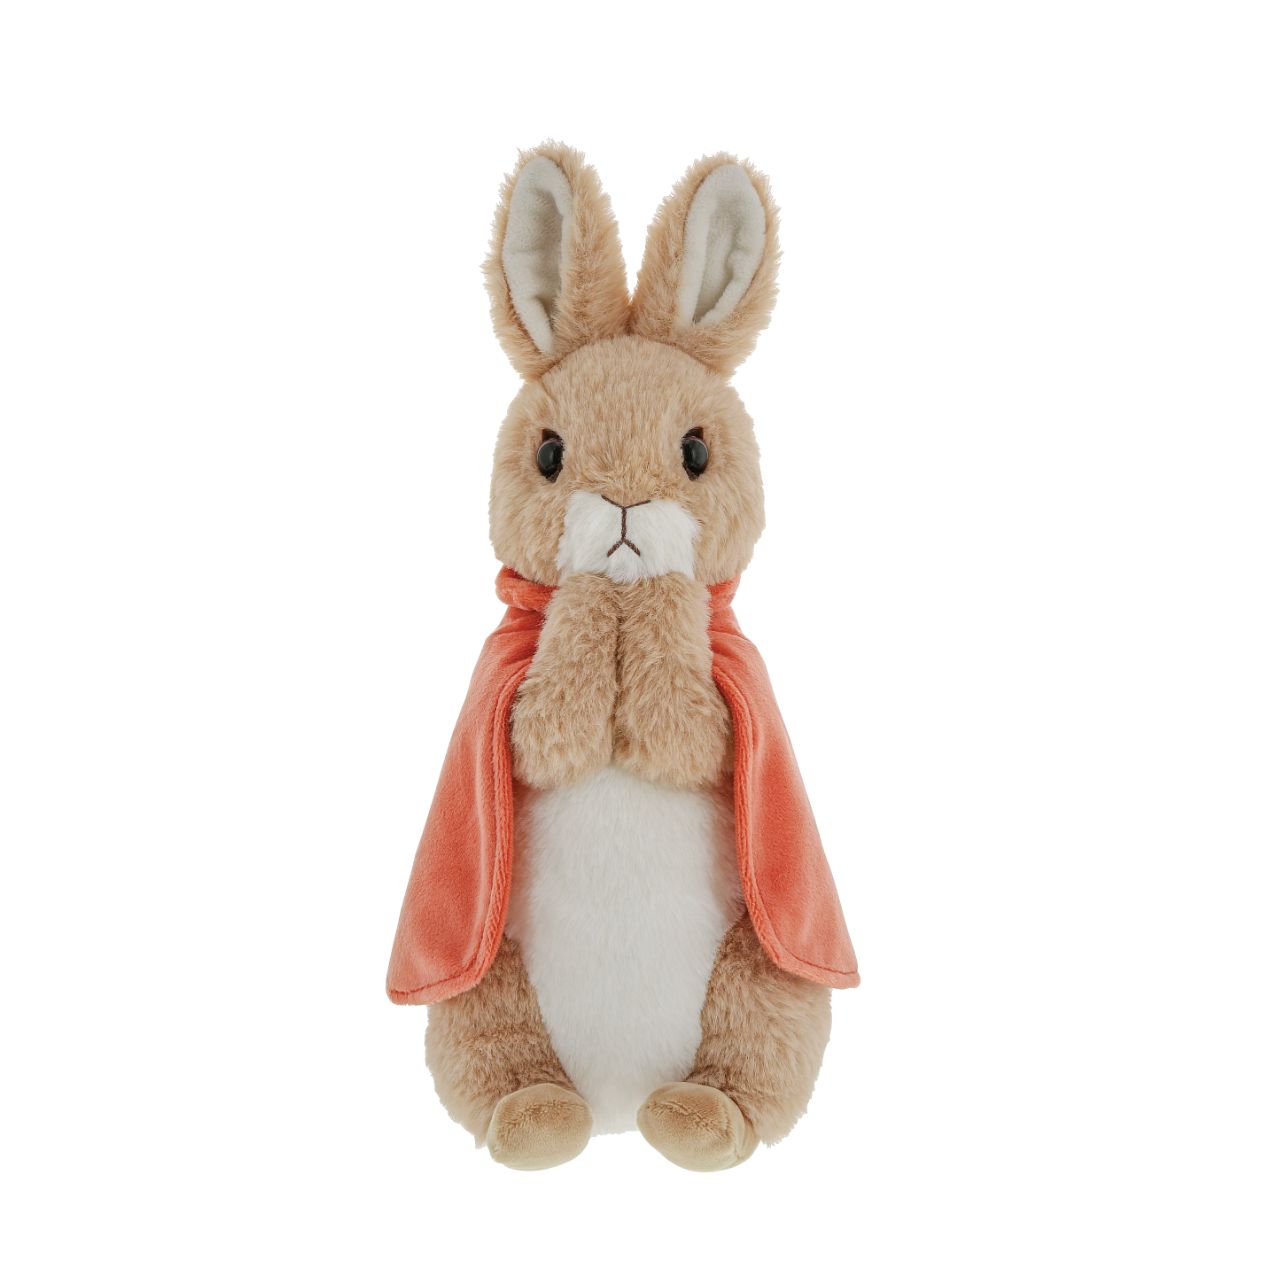 Beatrix Potter Flopsy Large  This Flopsy soft toy is made from beautifully soft fabric and is dressed in clothing exactly as illustrated by Beatrix Potter, with her signature red cape. The Peter Rabbit collection features the much loved characters from the Beatrix Potter books and this quality and authentic soft toy is sure to be adored for many years to come.